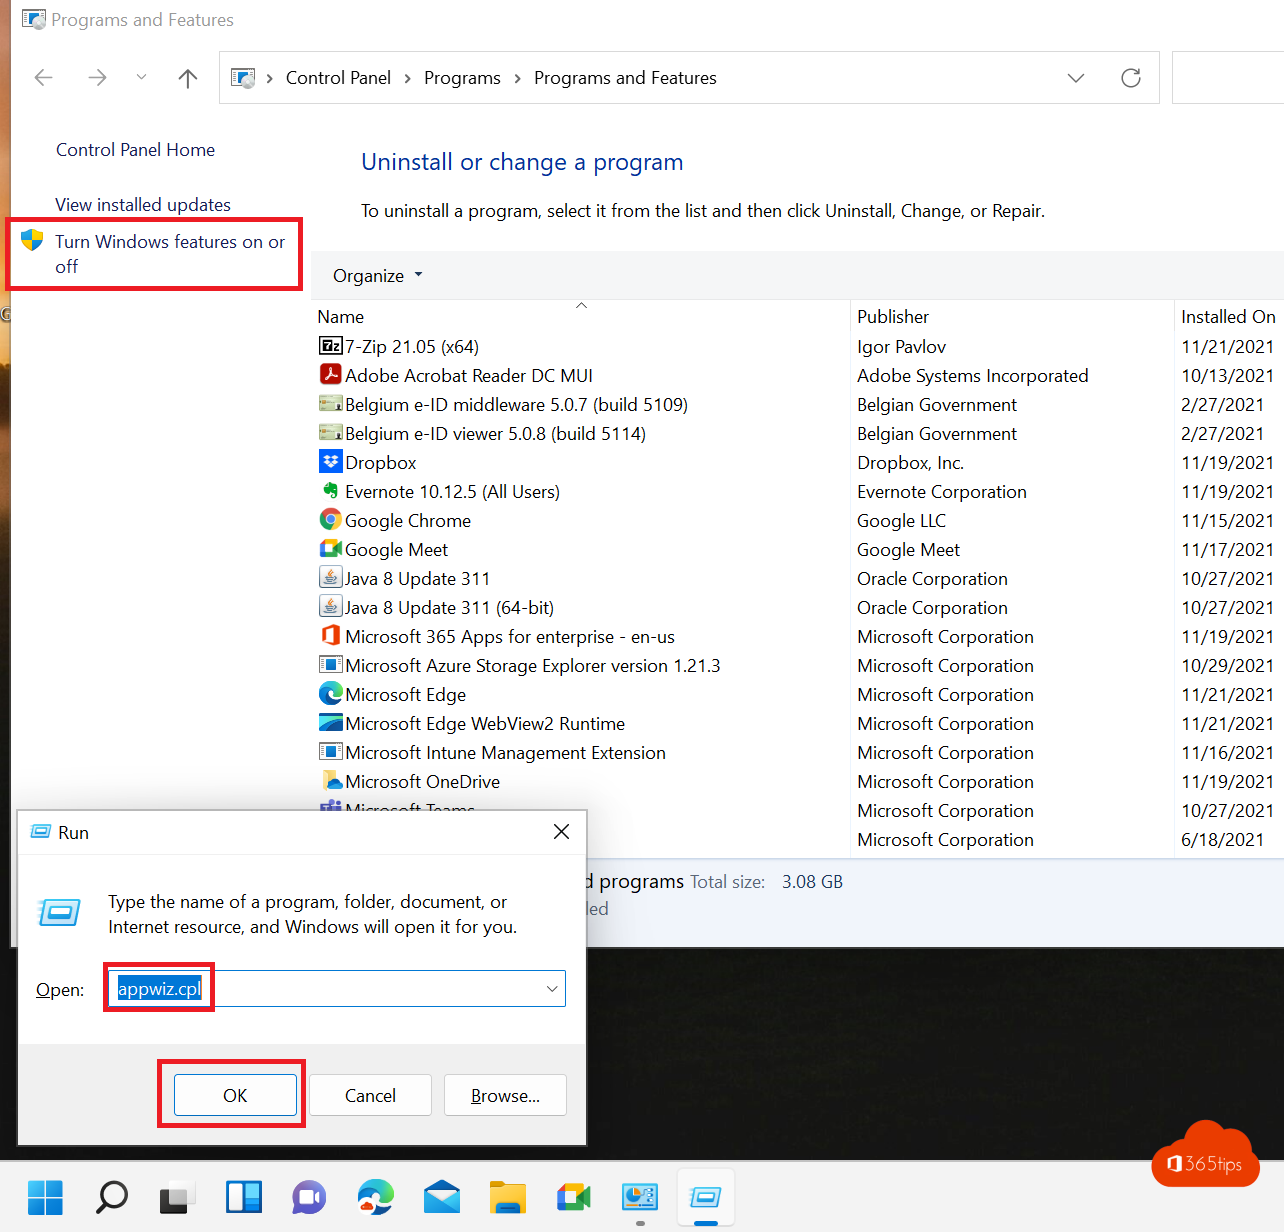 How to enable or disable Windows Features in Windows 10 or 11